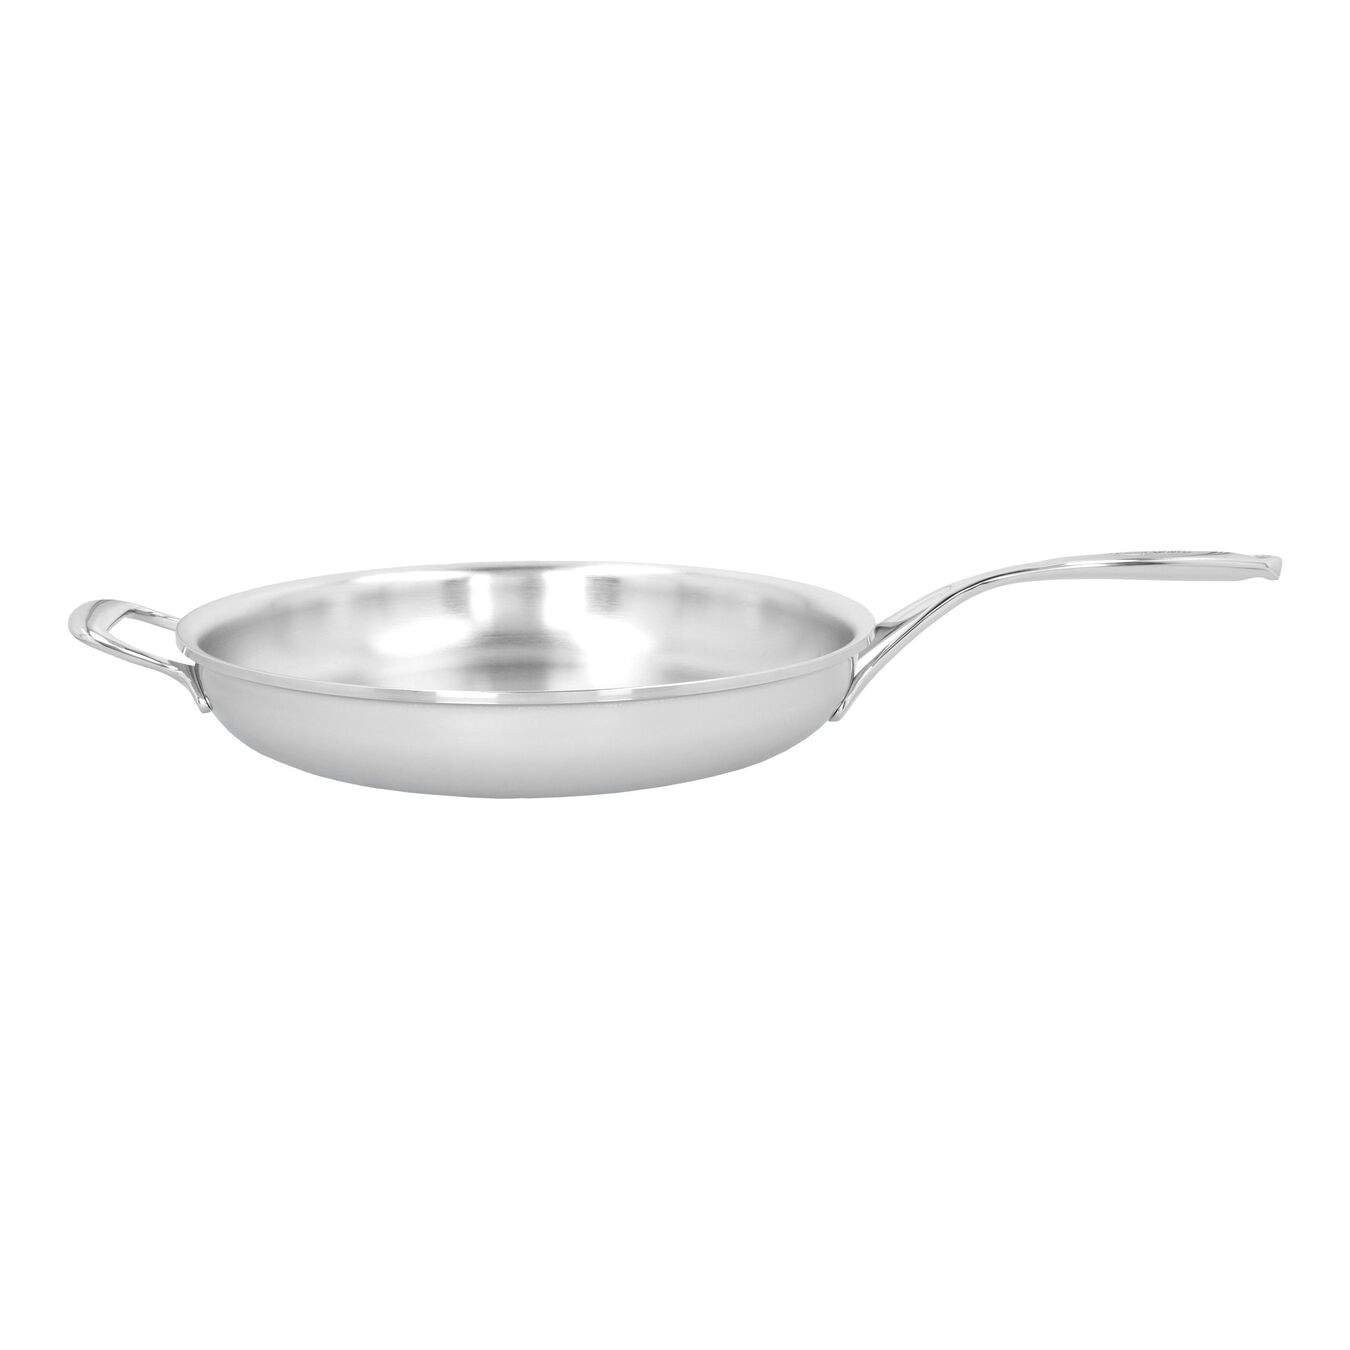 32 cm 18/10 Stainless Steel Frying pan silver,,large 1